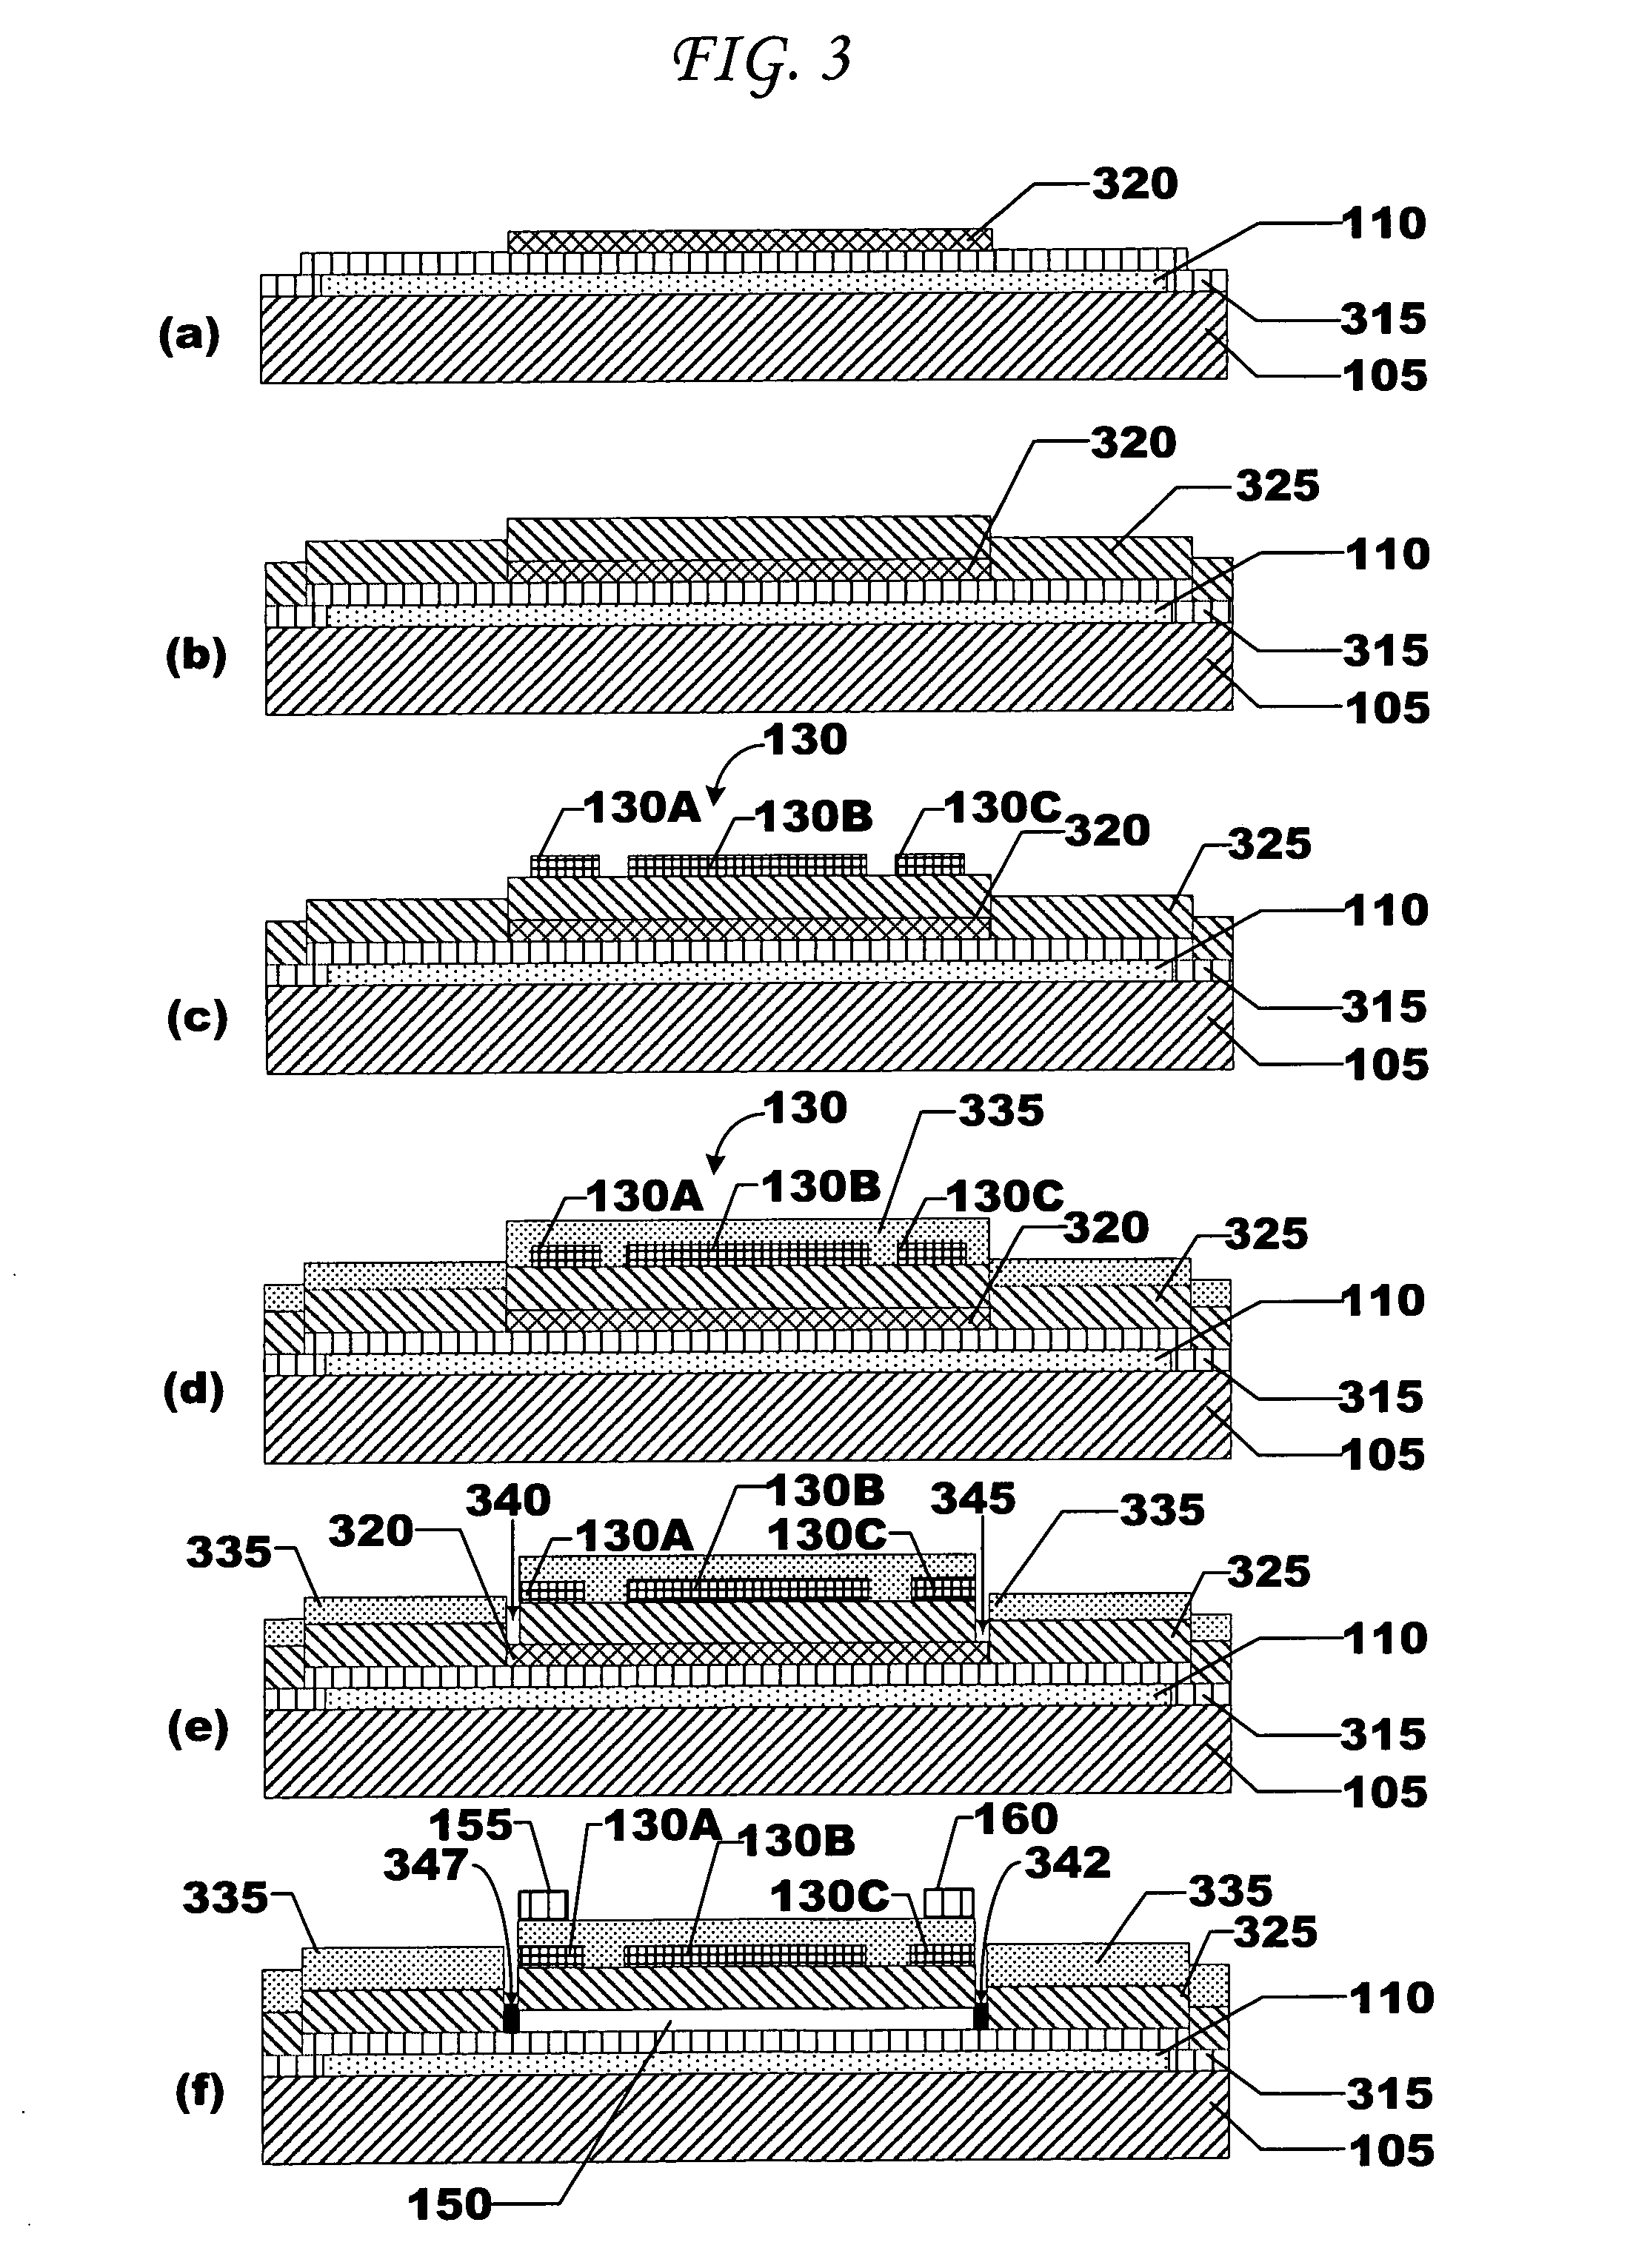 Asymetric membrane cMUT devices and fabrication methods